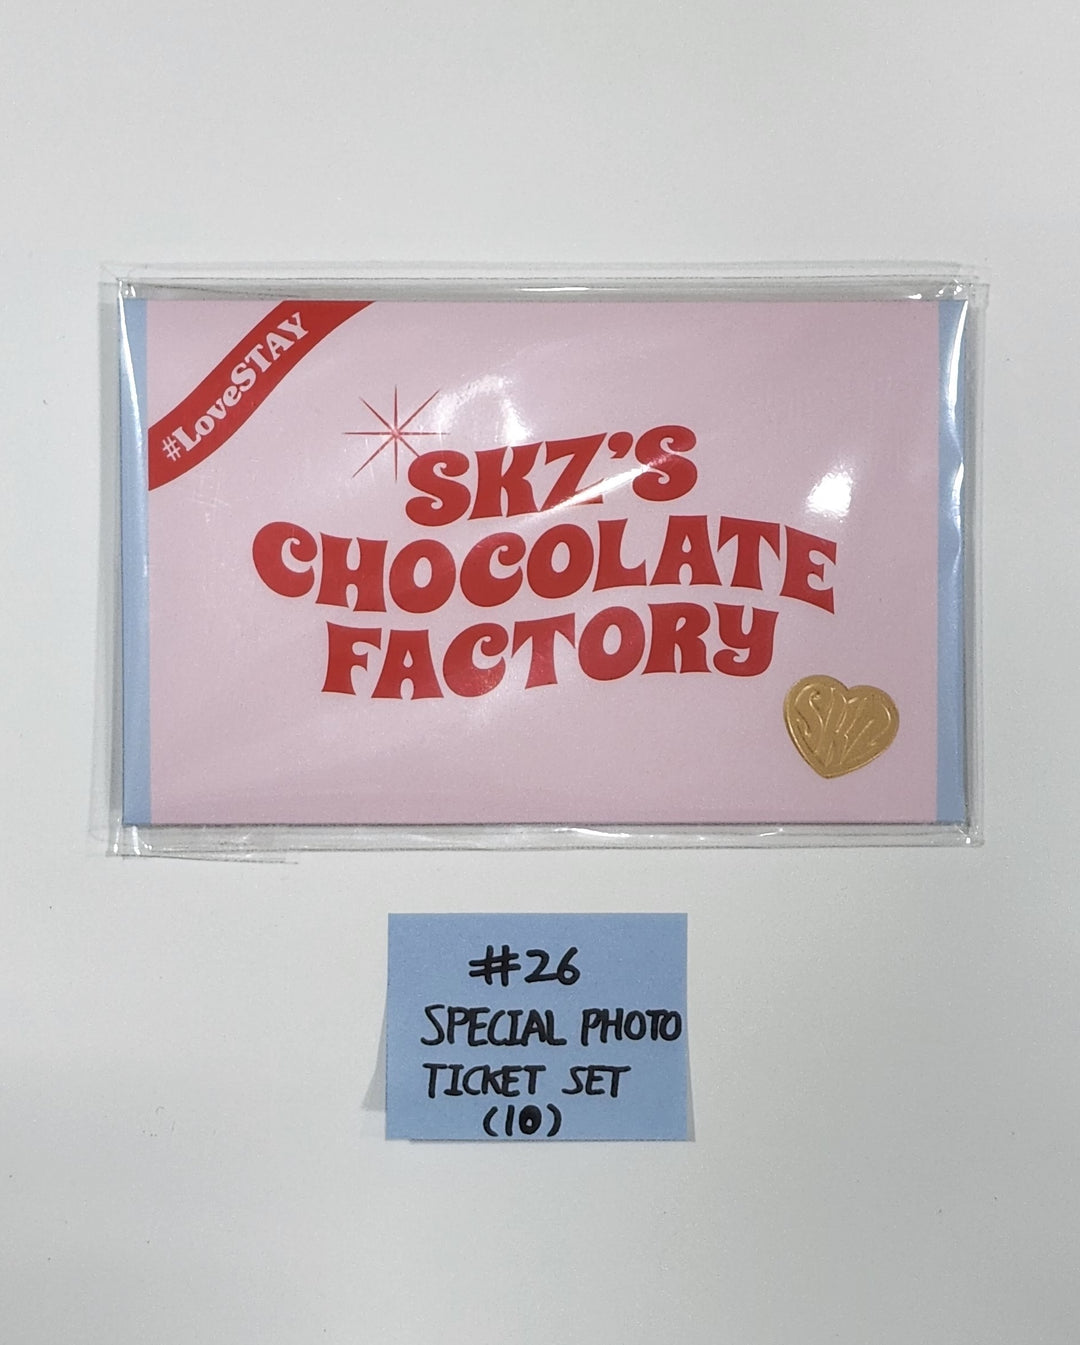 Stray Kids - [2ND#LoveSTAY 'SKZ'S CHOCOLATE FACTORY] - Official MD